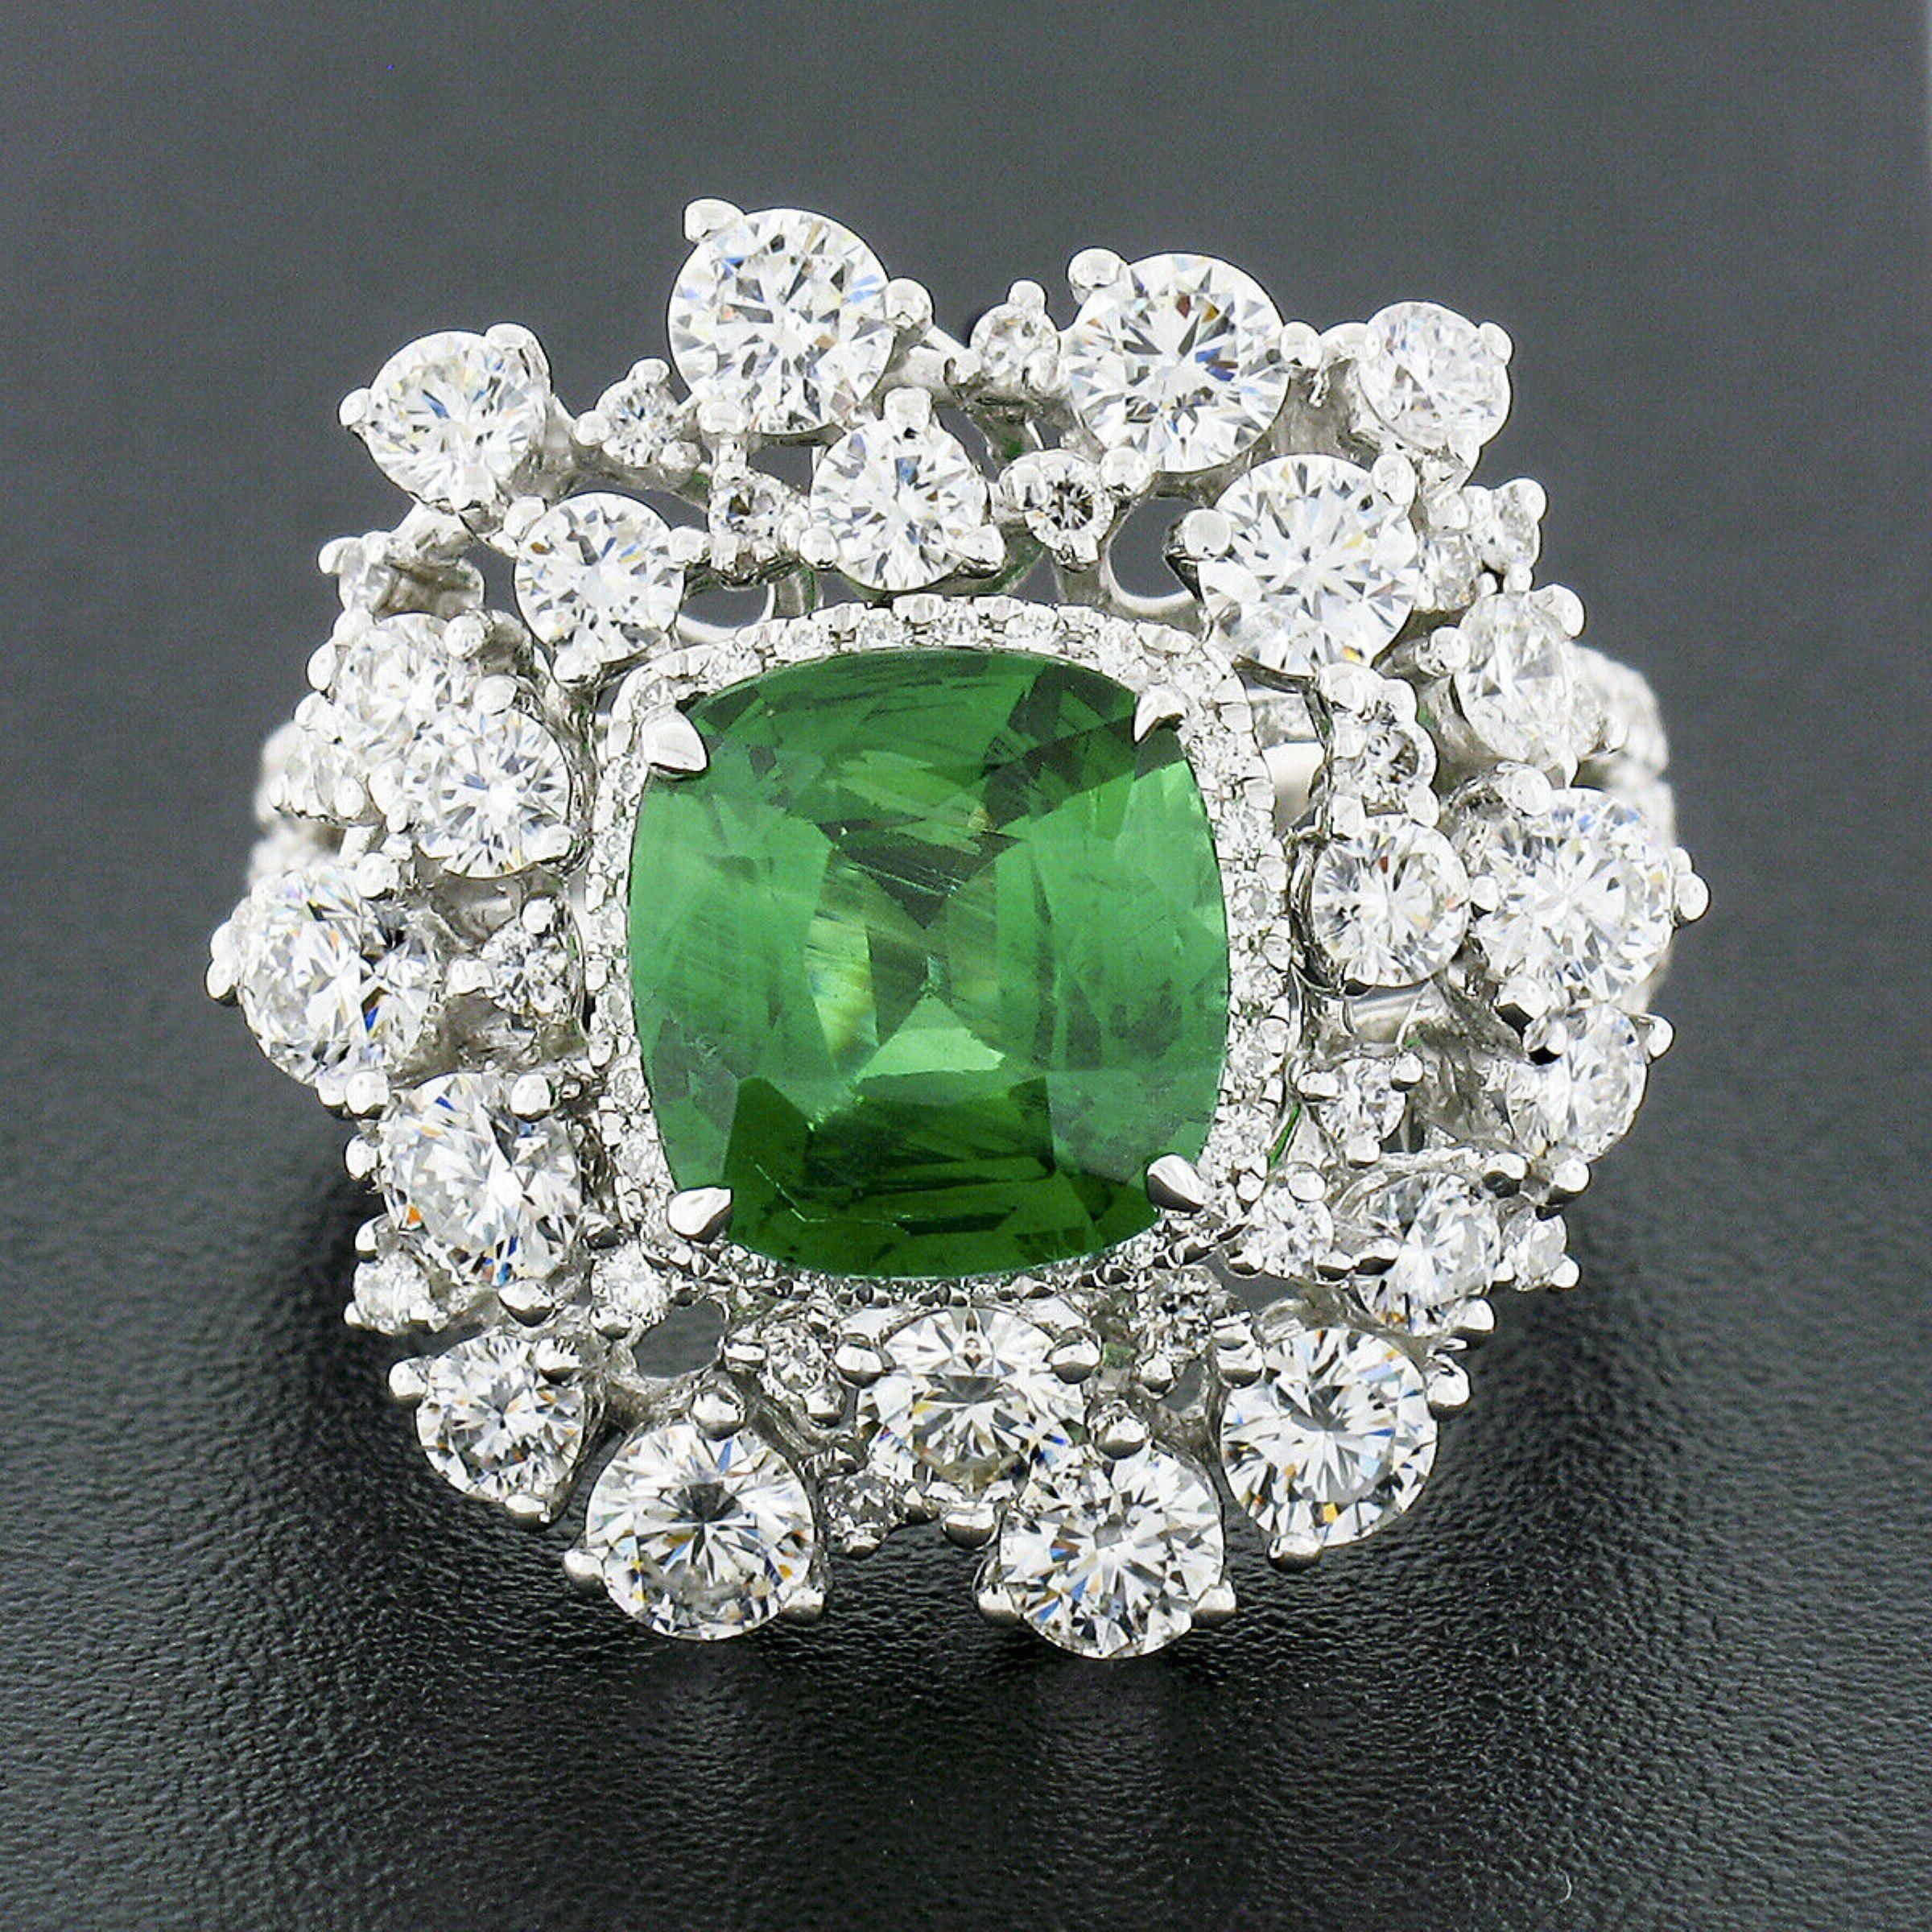 This gorgeous statement ring is very well crafted in solid 18k white gold and features a fine quality cushion cut tsavorite stone with an incredible fiery green color, certified by GIA and weighing 2.64 carats. The tsavorite is prong set at the